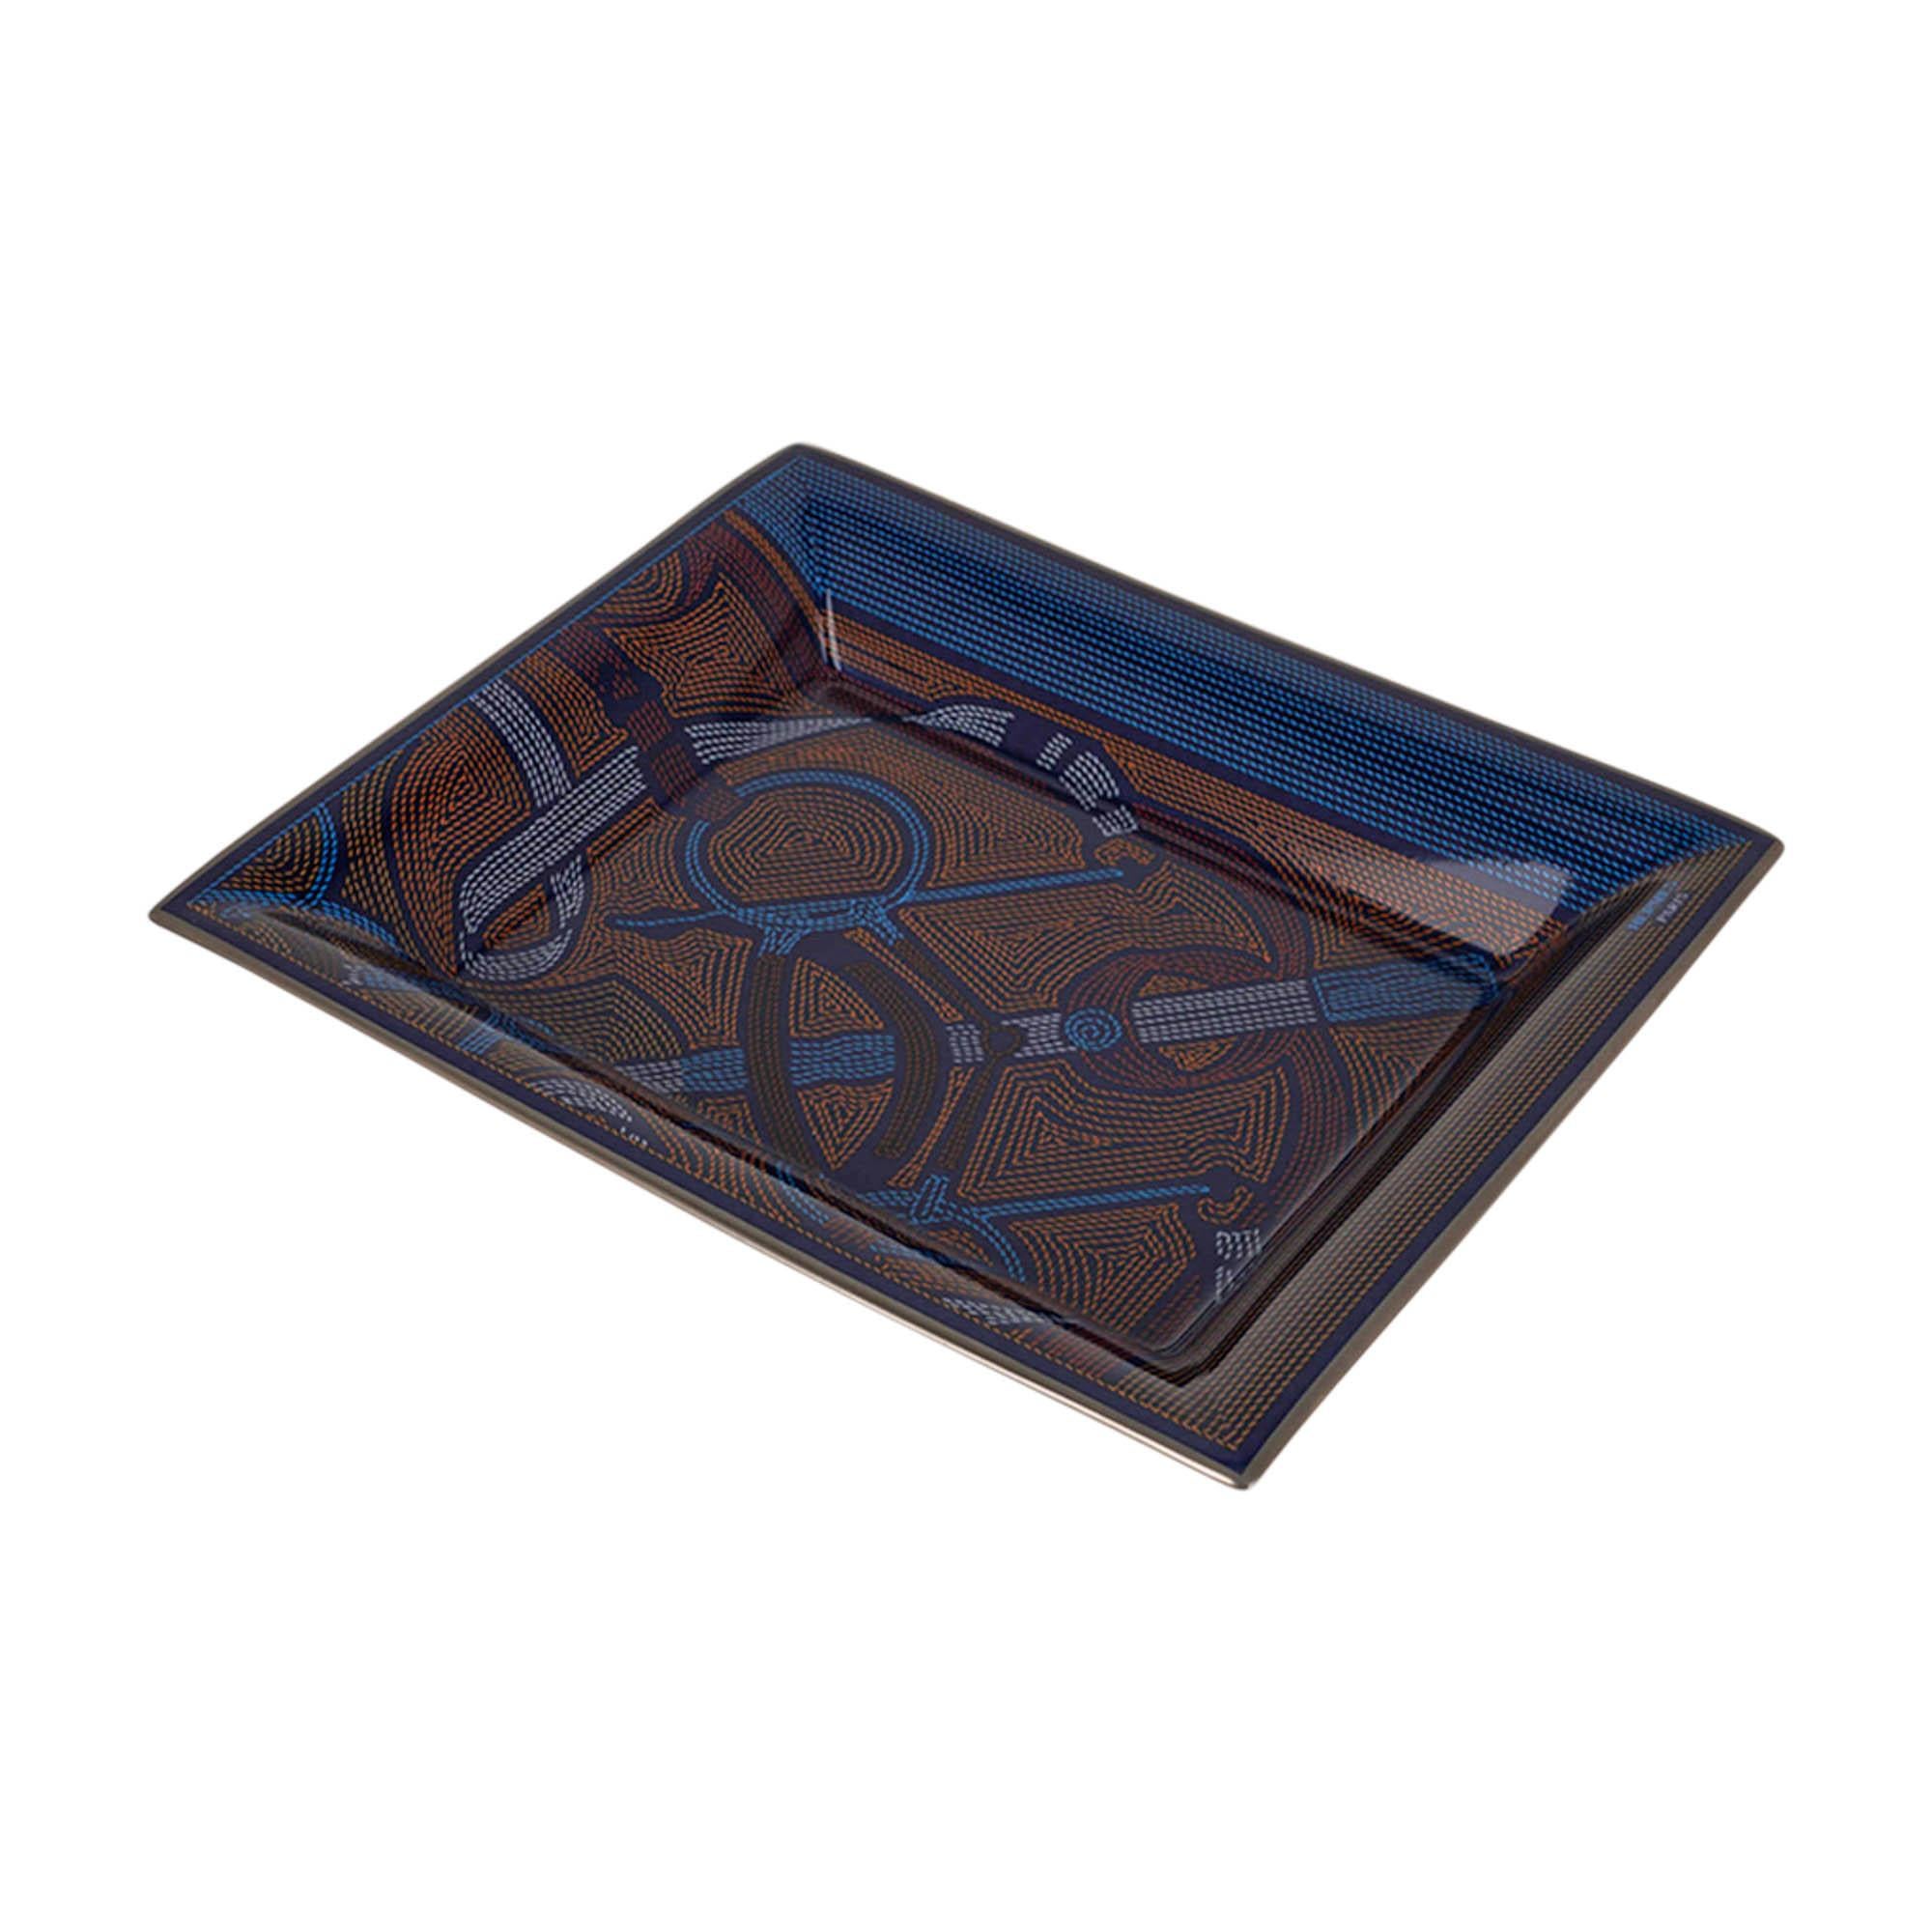 Mightychic offers an Hermes Eperon d'Or change tray.
Marine colorway.
Hand painted Platinum trim.
Design by Henri d'Origny.
Porcelain decorated using chromolithography.
A perfect accent piece for any room.
Protected by velvet goatskin on the